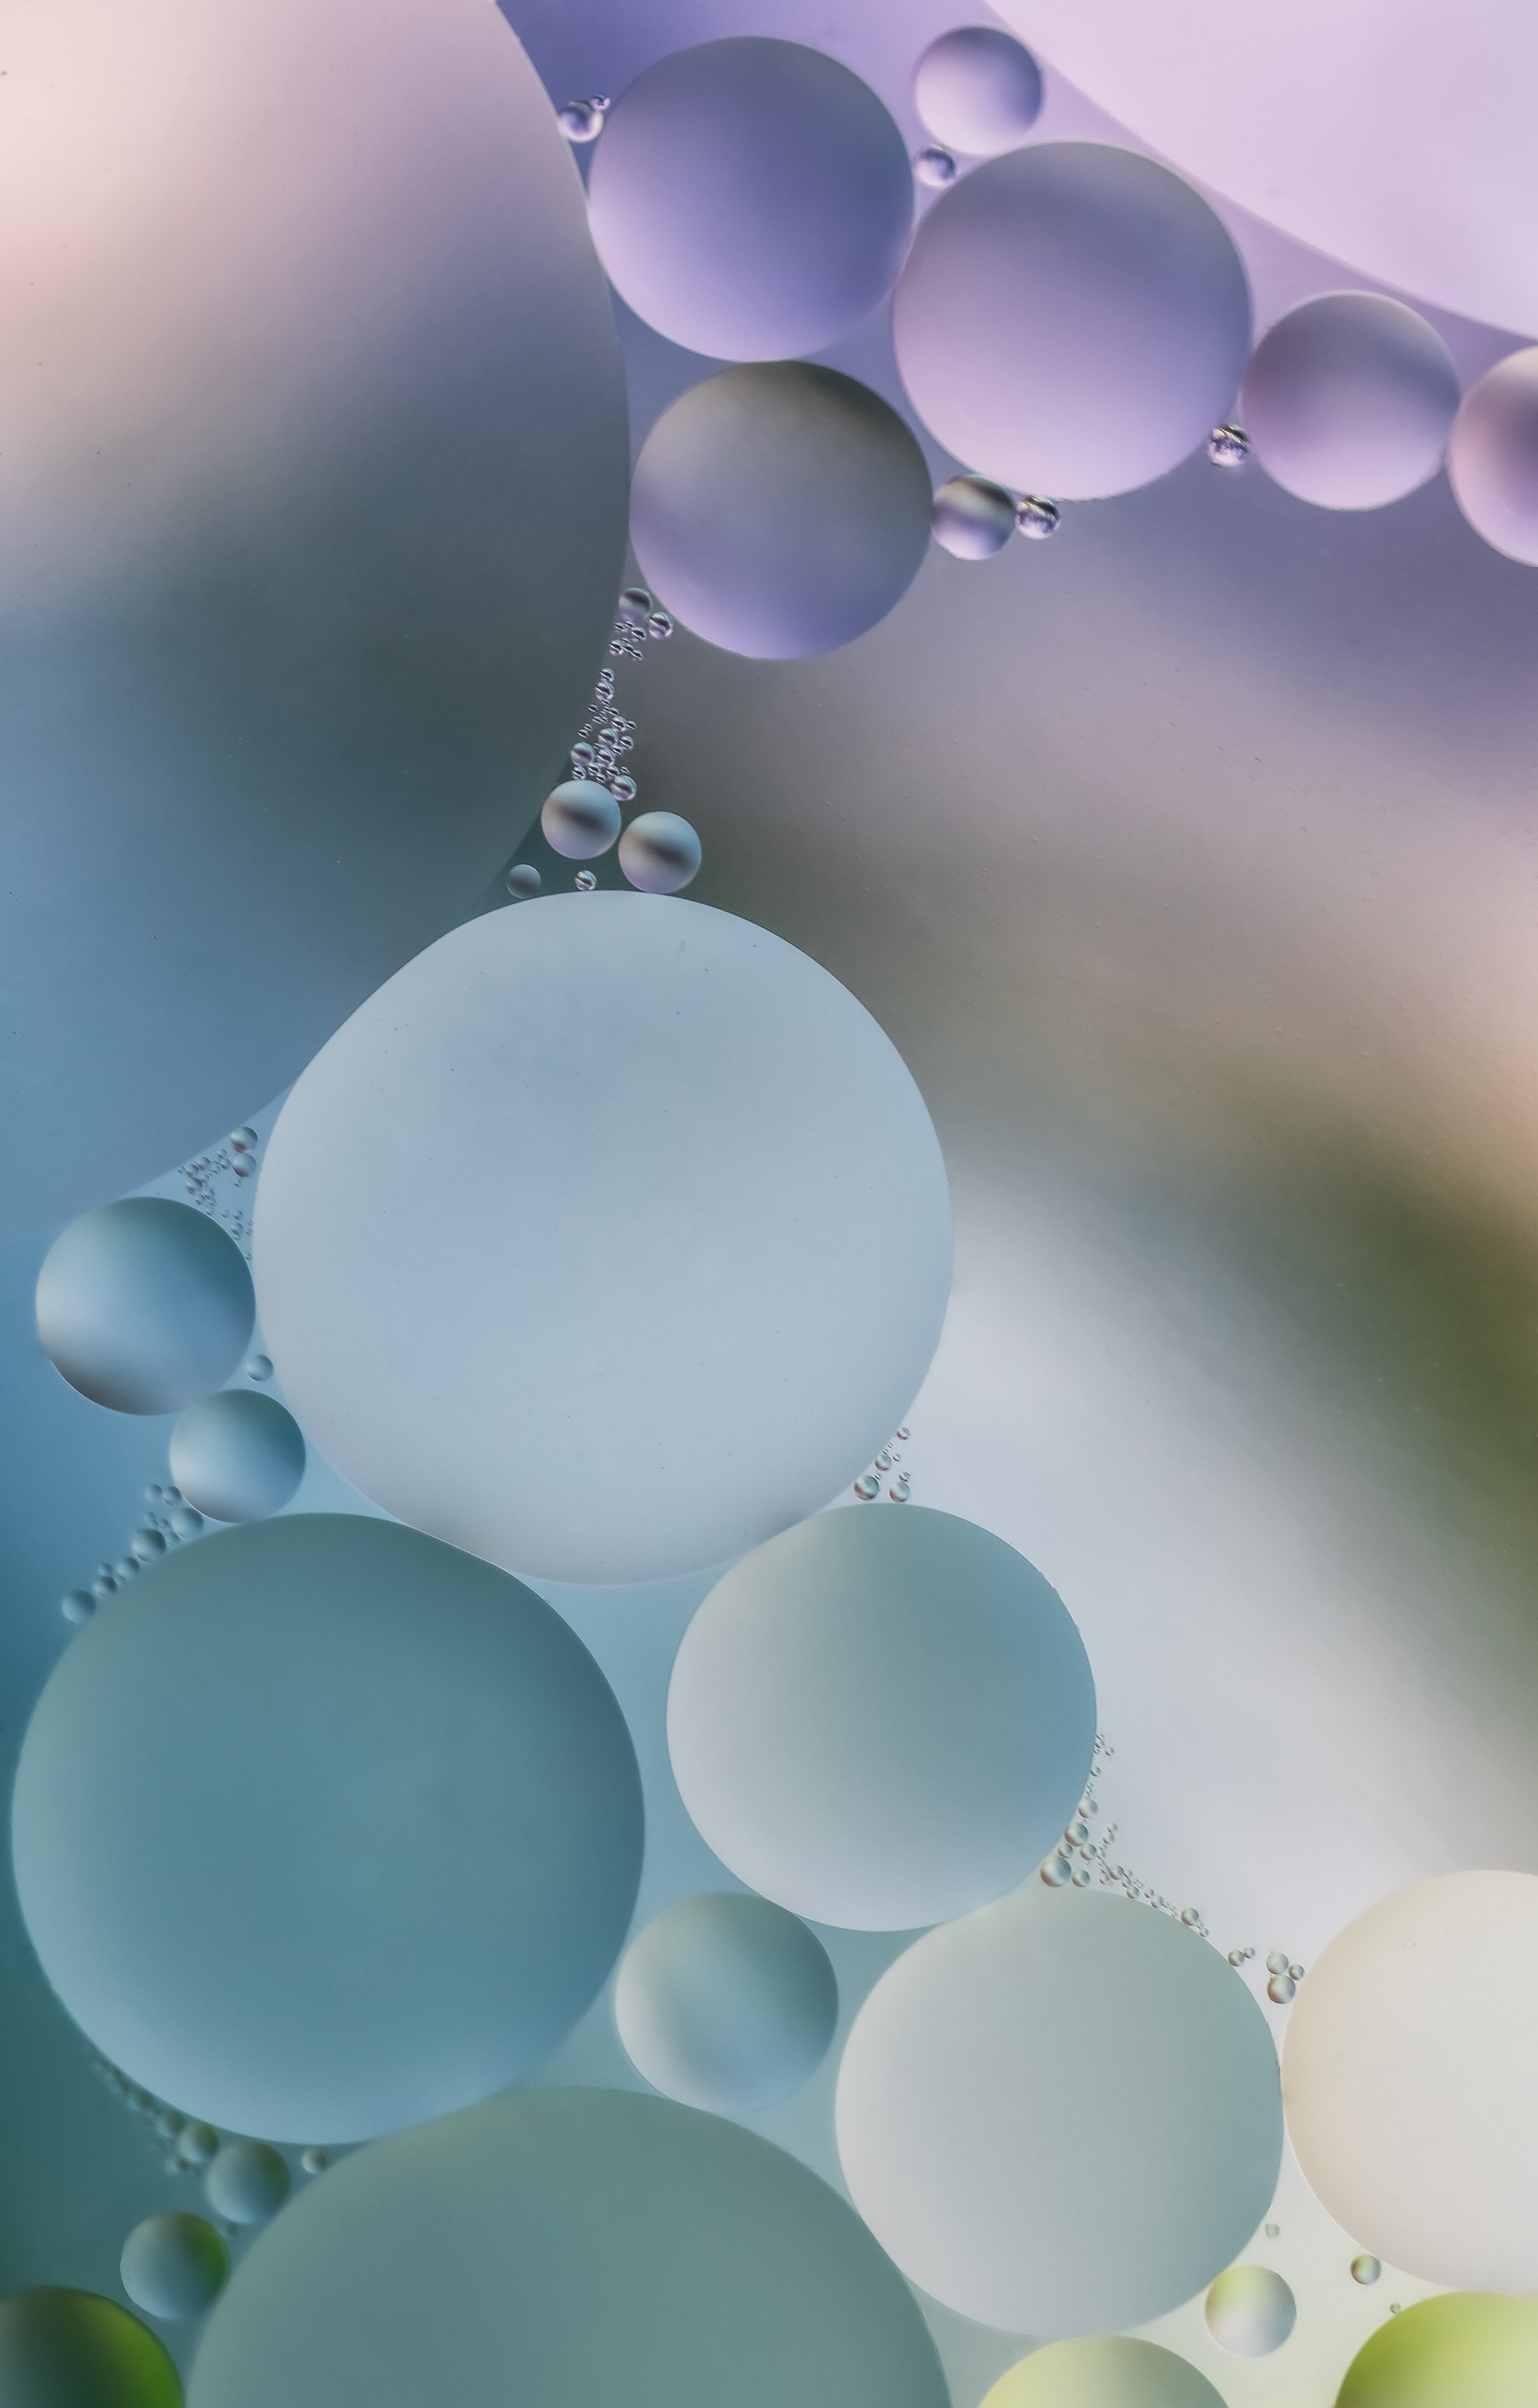 liquid, water, faded, bubbles, abstract